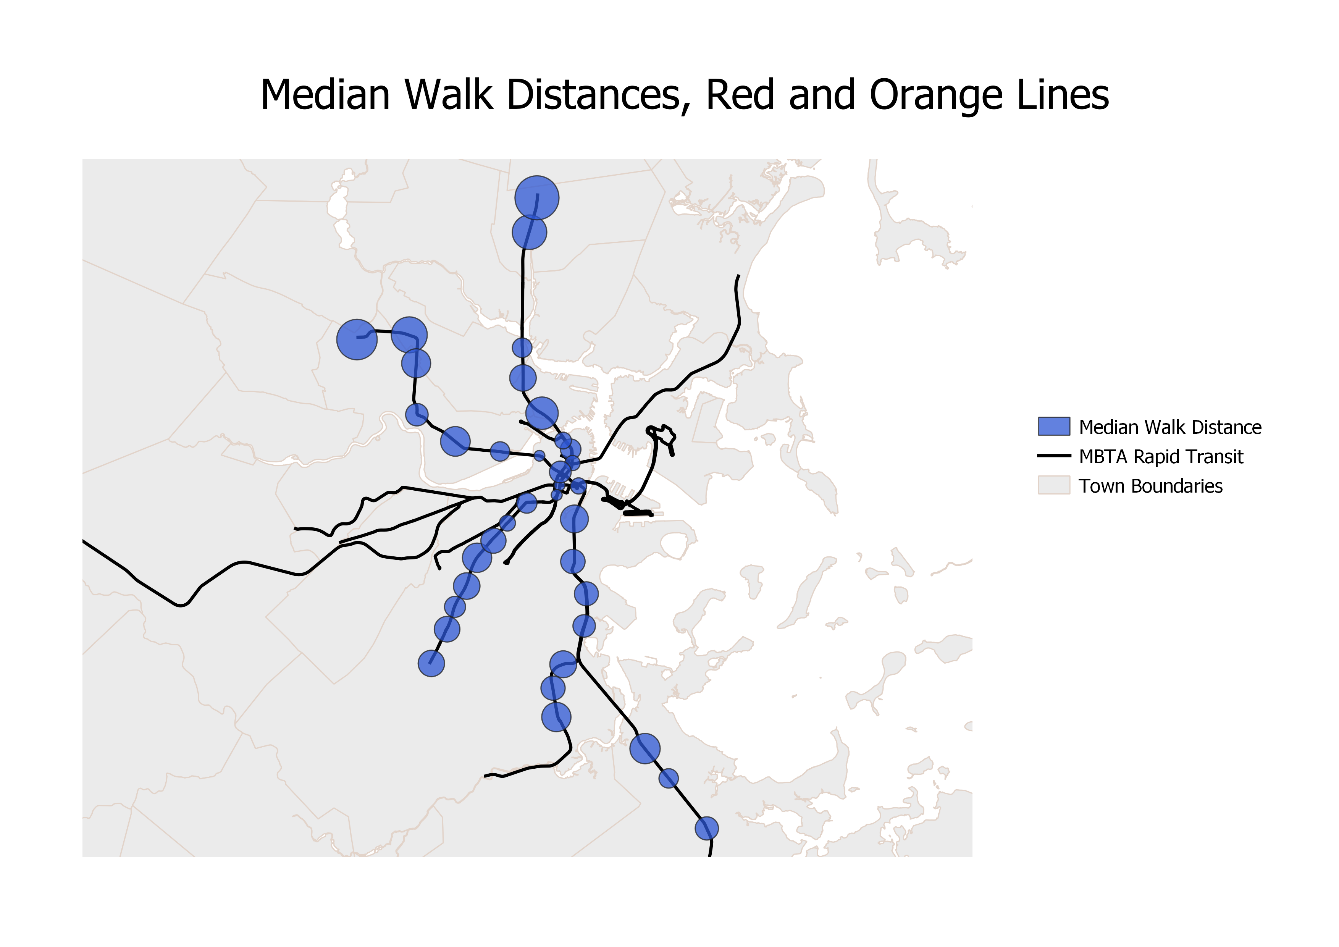 An image of the median walk distances for the Red and Orange Lines. Walk distances are longer on the terminals. The medians are generally smaller than the means.